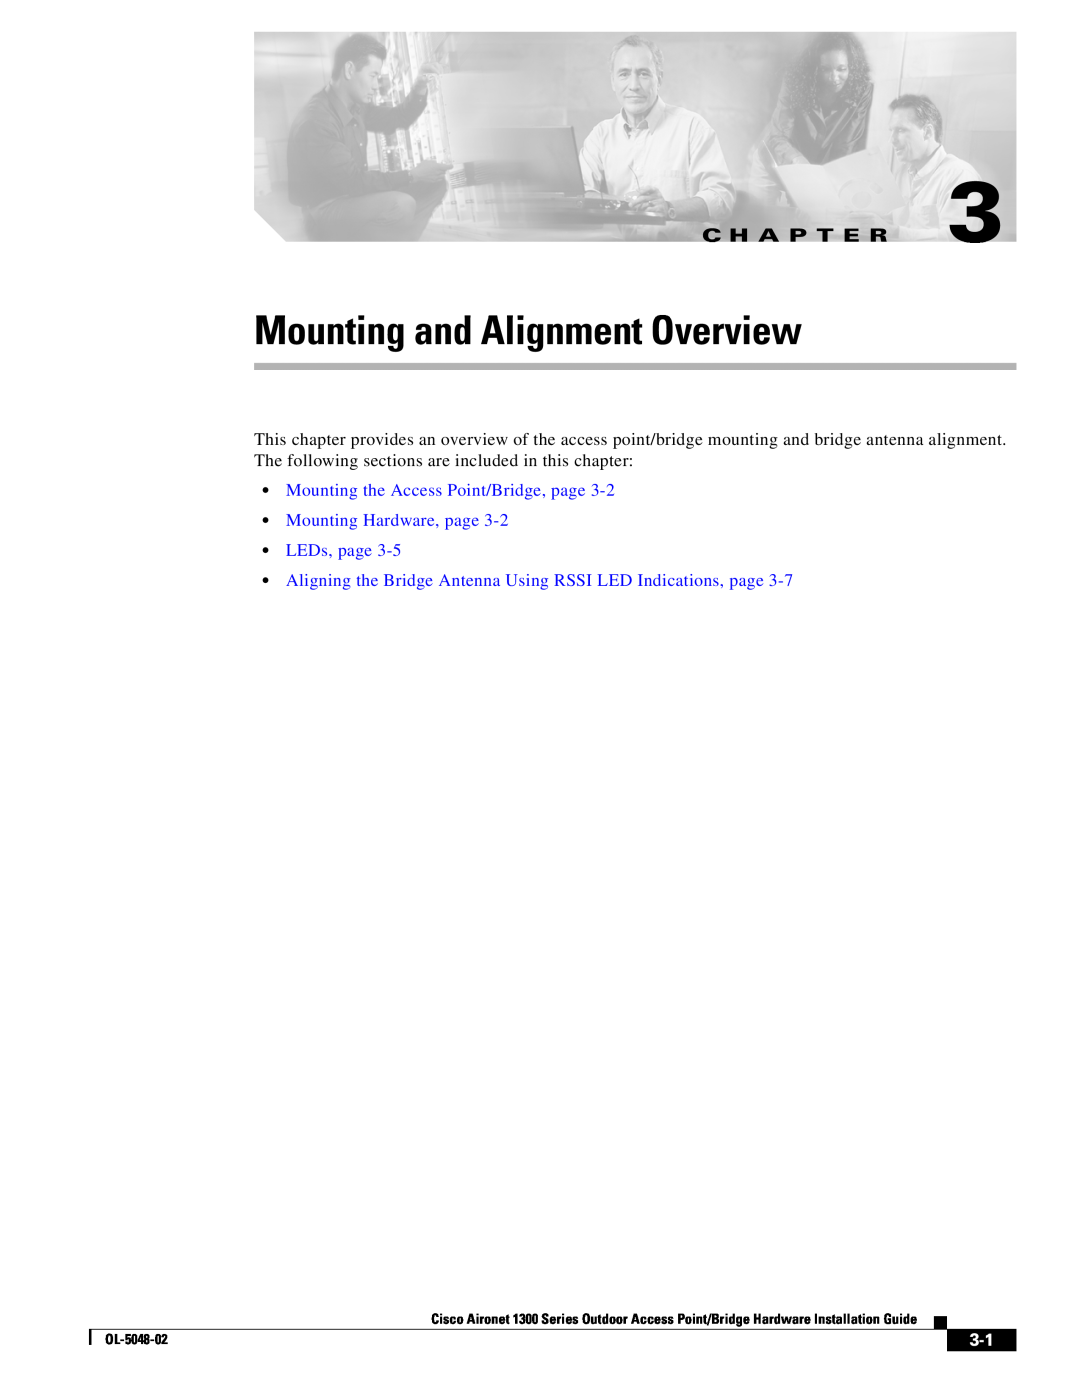 Cisco Systems 1300 Series Mounting and Alignment Overview, Mounting the Access Point/Bridge, page Mounting Hardware, page 